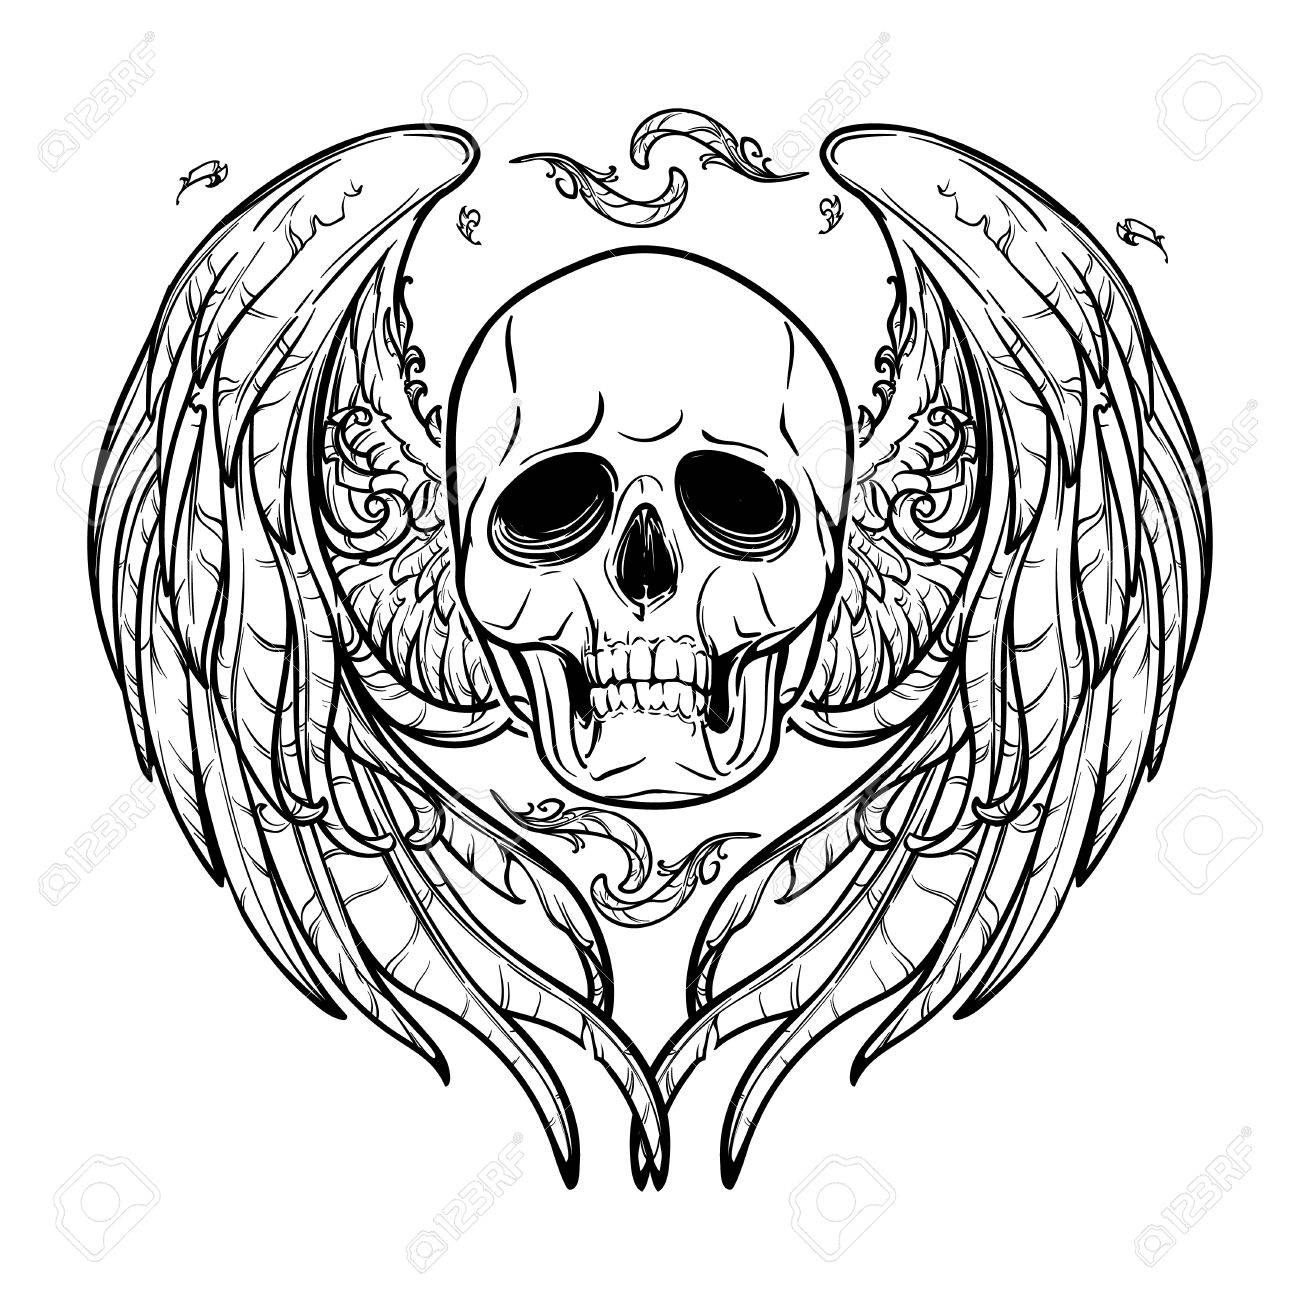 Skull With Wings Drawing at GetDrawings Free download